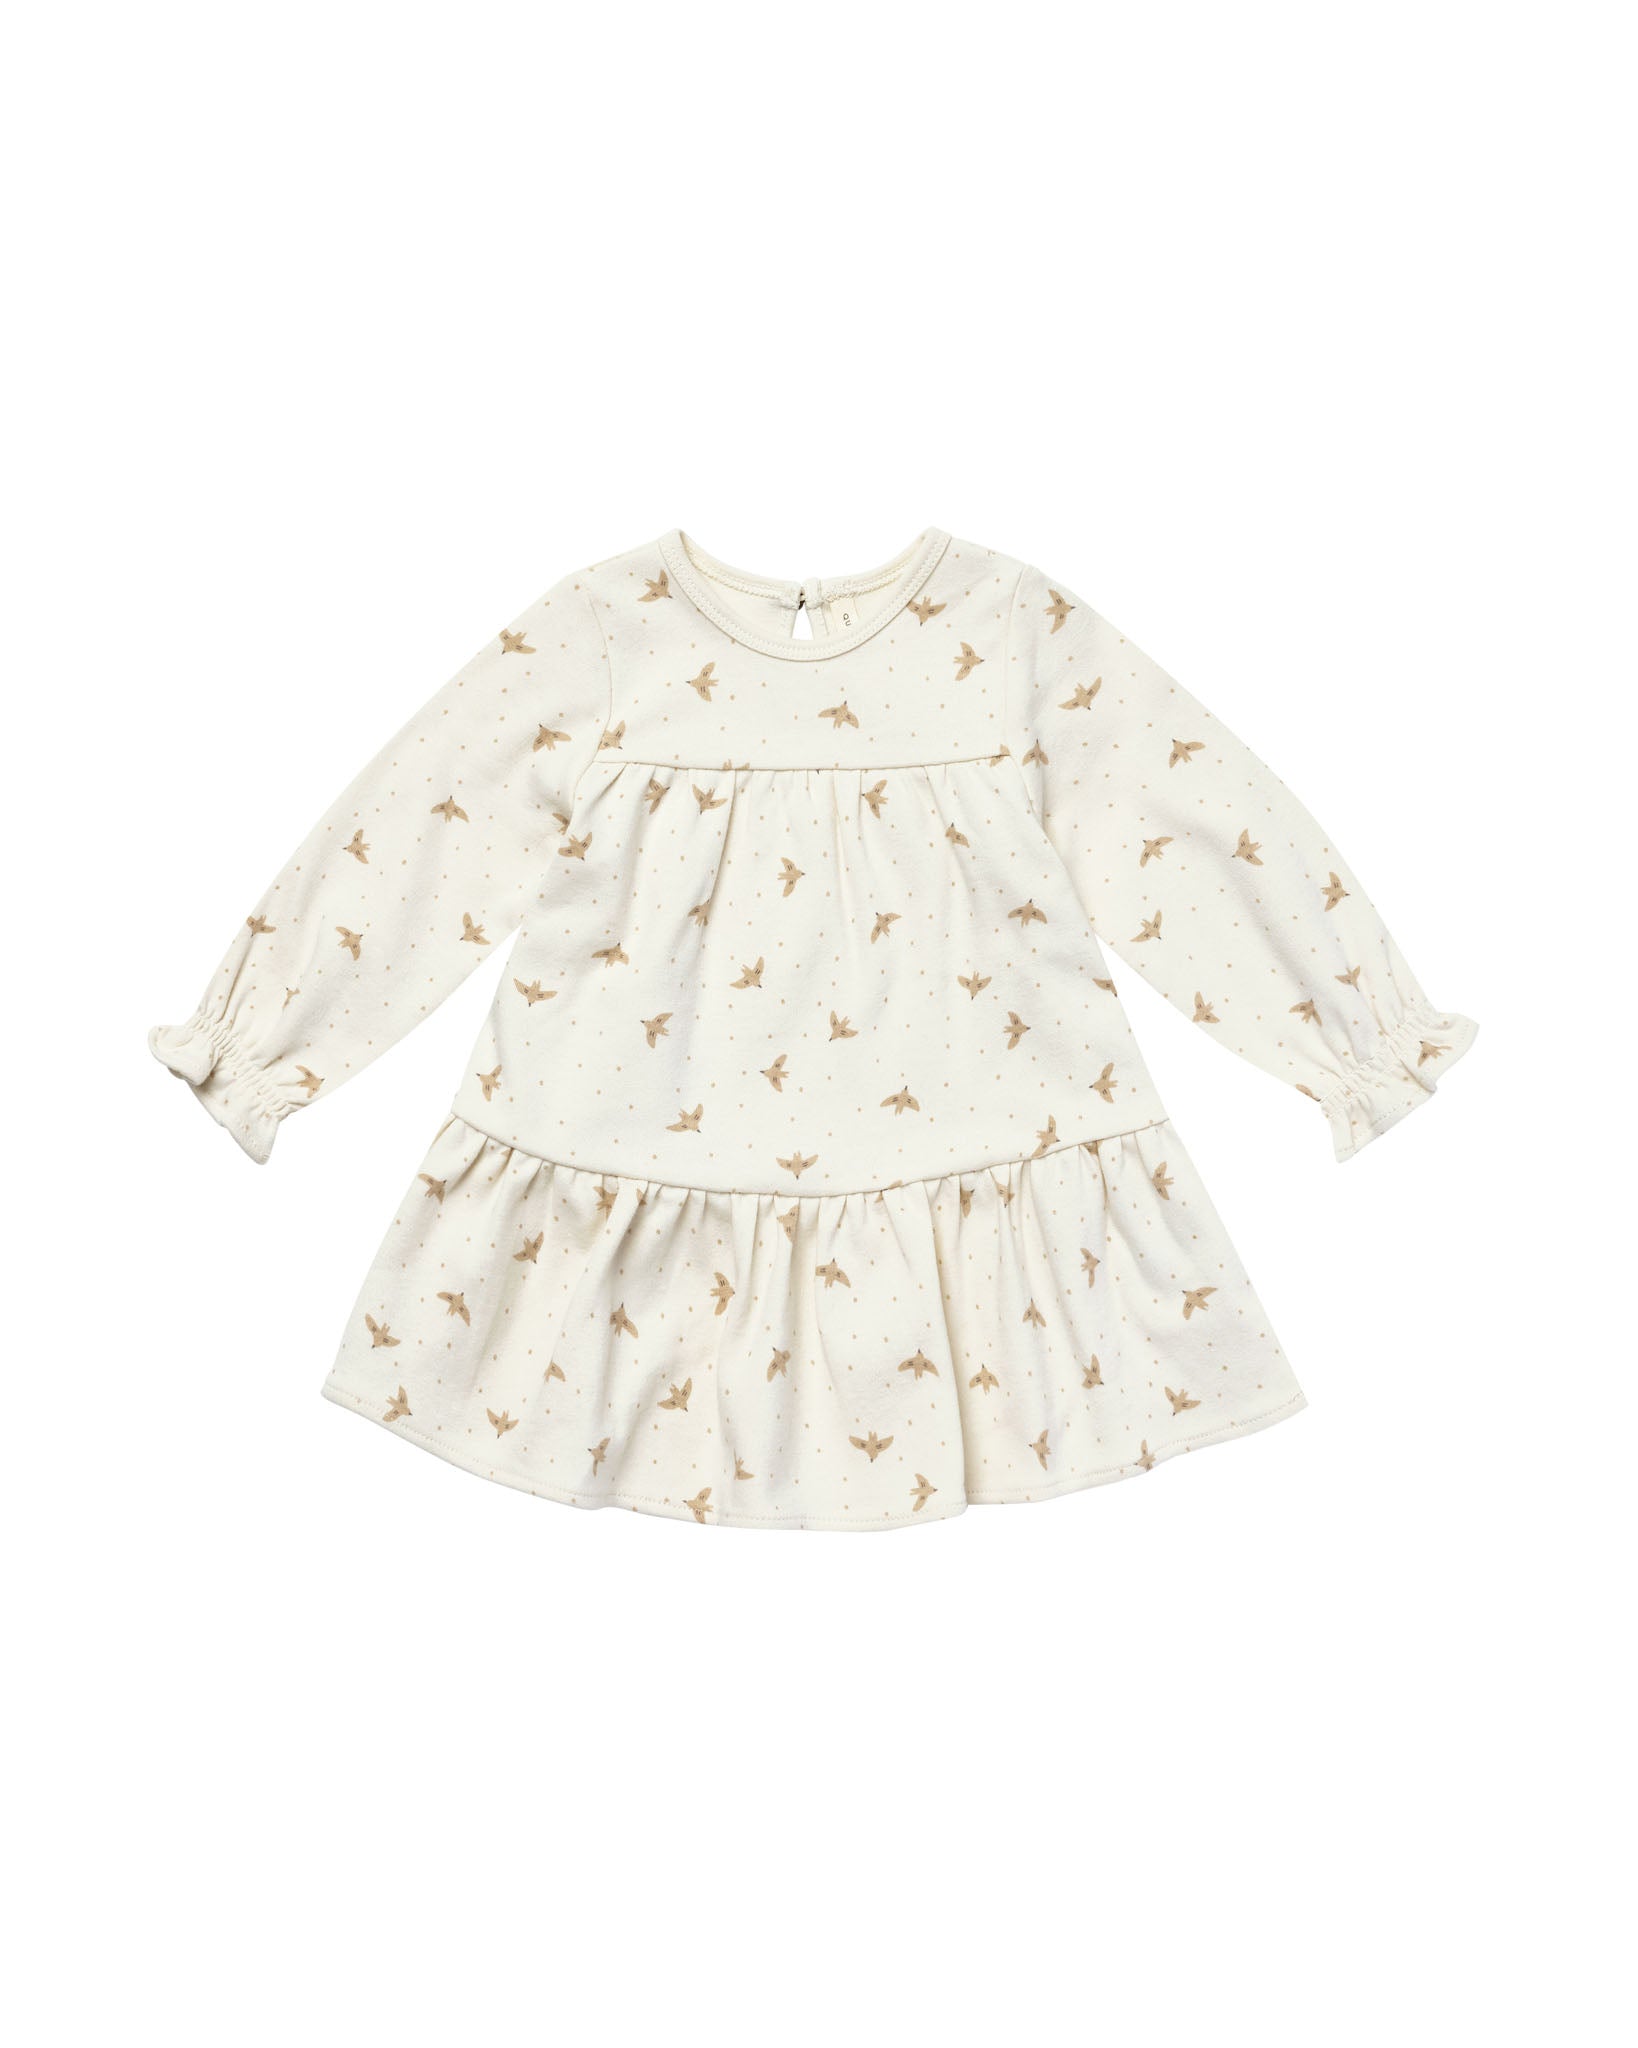 QUINCY MAE TIERED JERSEY DRESS / DOVES